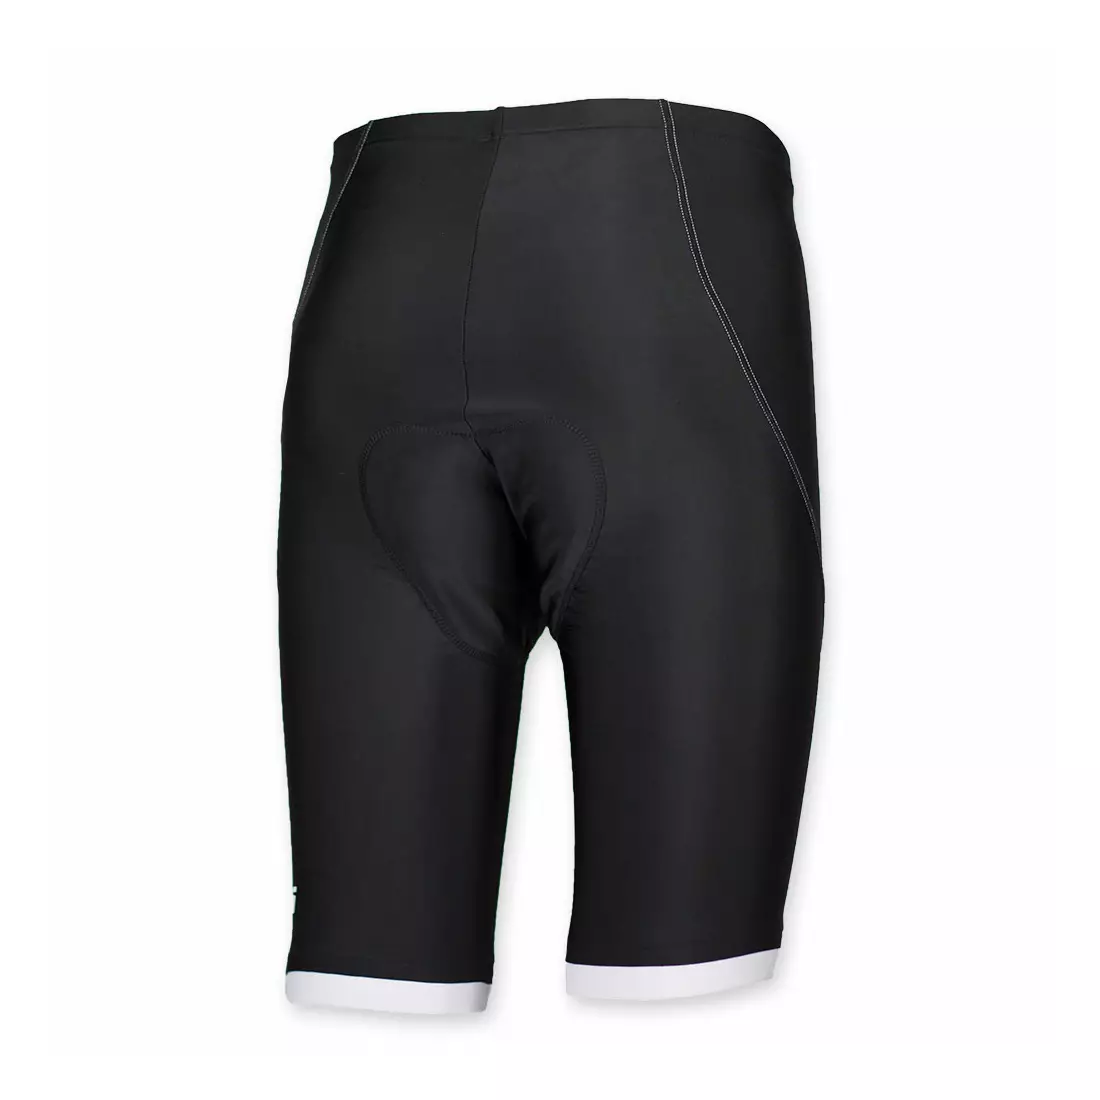 ROGELLI BIKE 002.408 POSADA men's cycling shorts, without suspenders, black and white